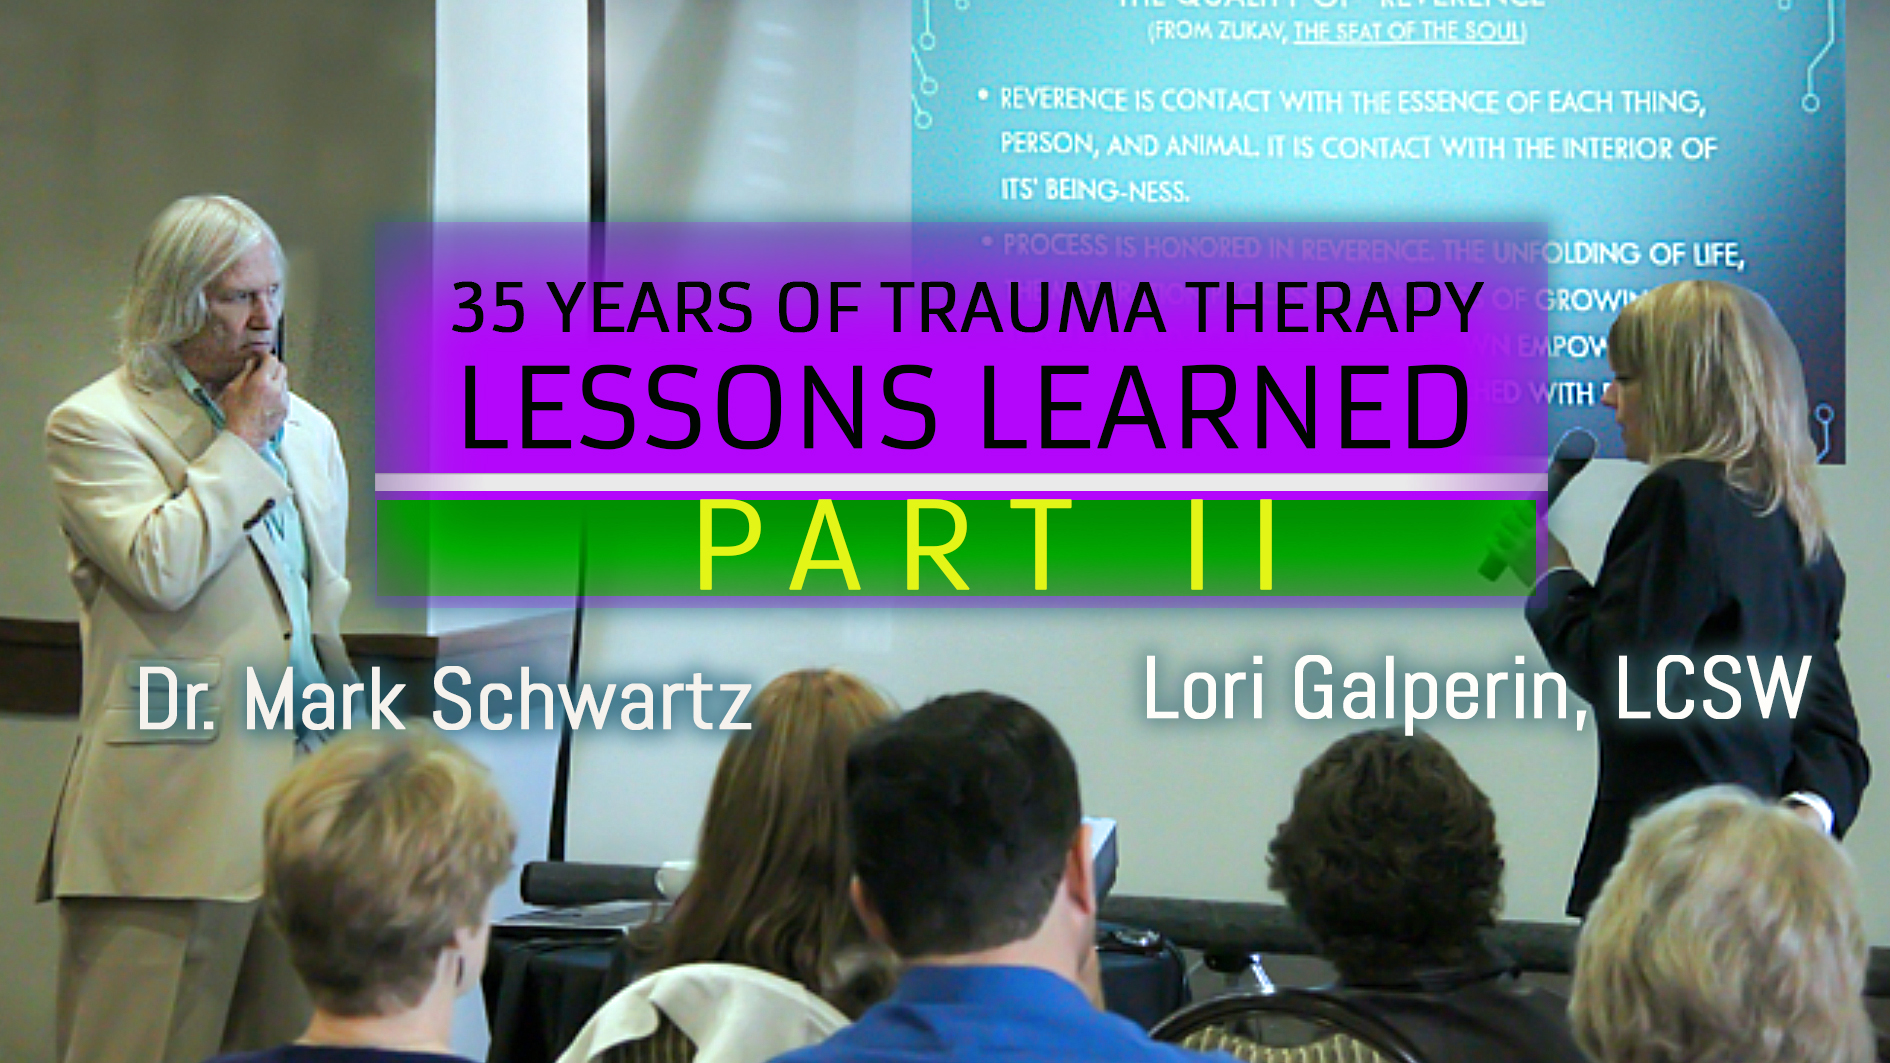 WEBINAR VIDEO: “30 Years of Trauma Therapy | Lessons Learned | PART II”